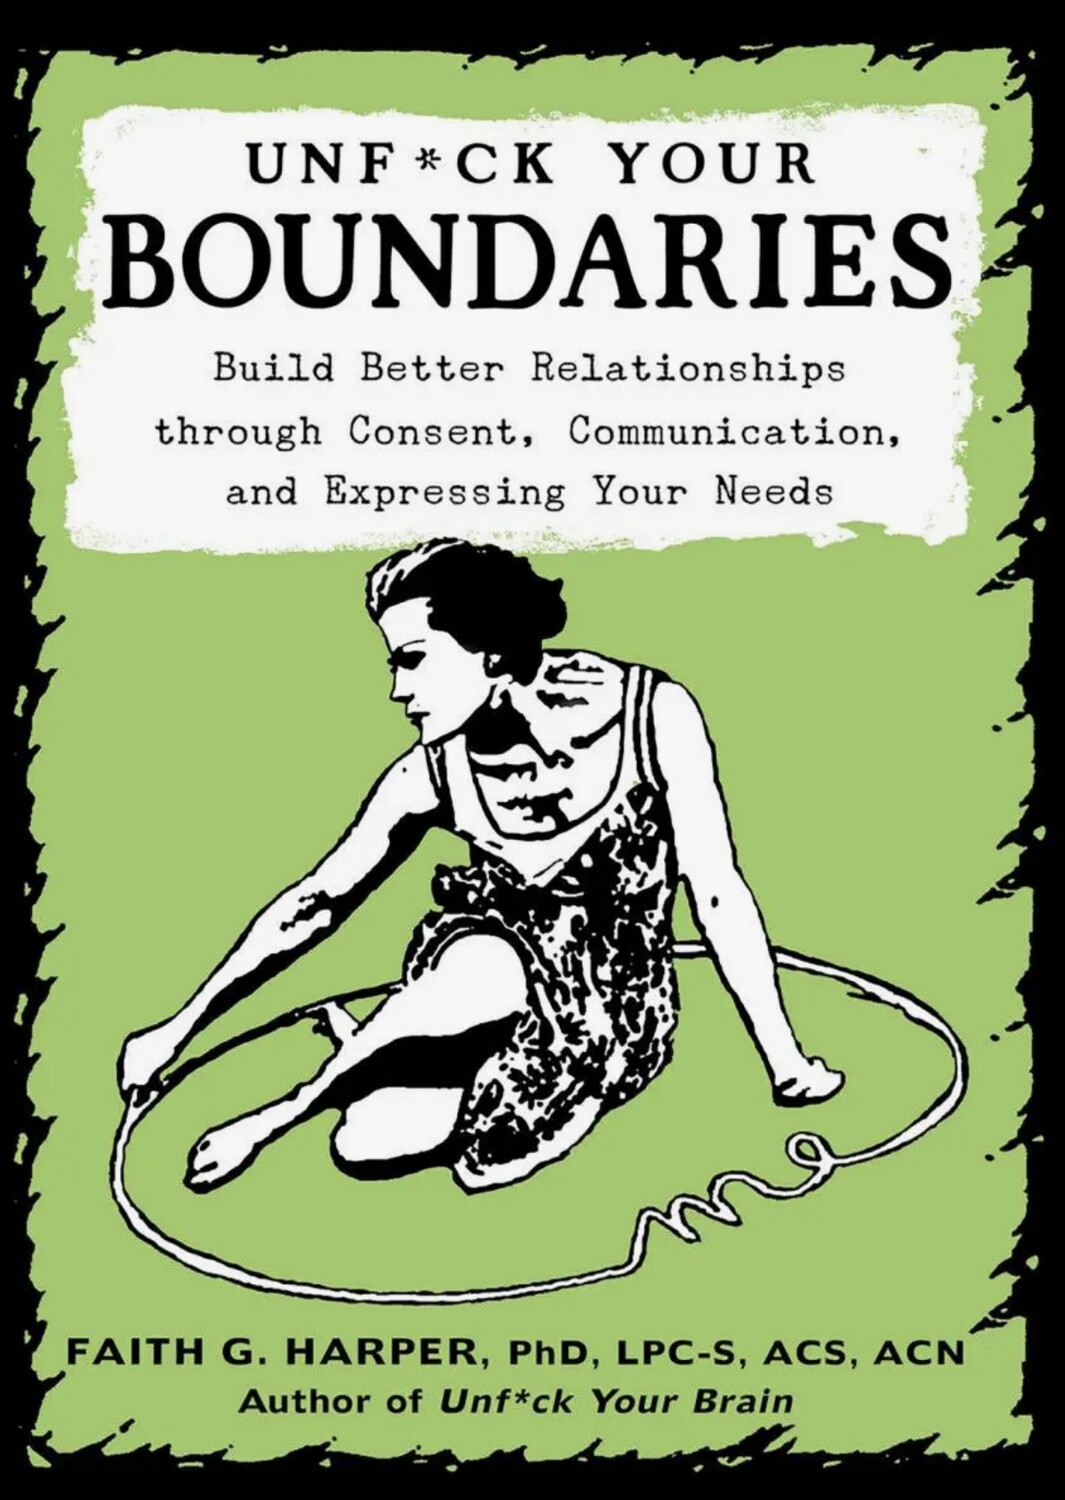 Unfuck Your Boundaries - Book by Dr. Faith G. Harper